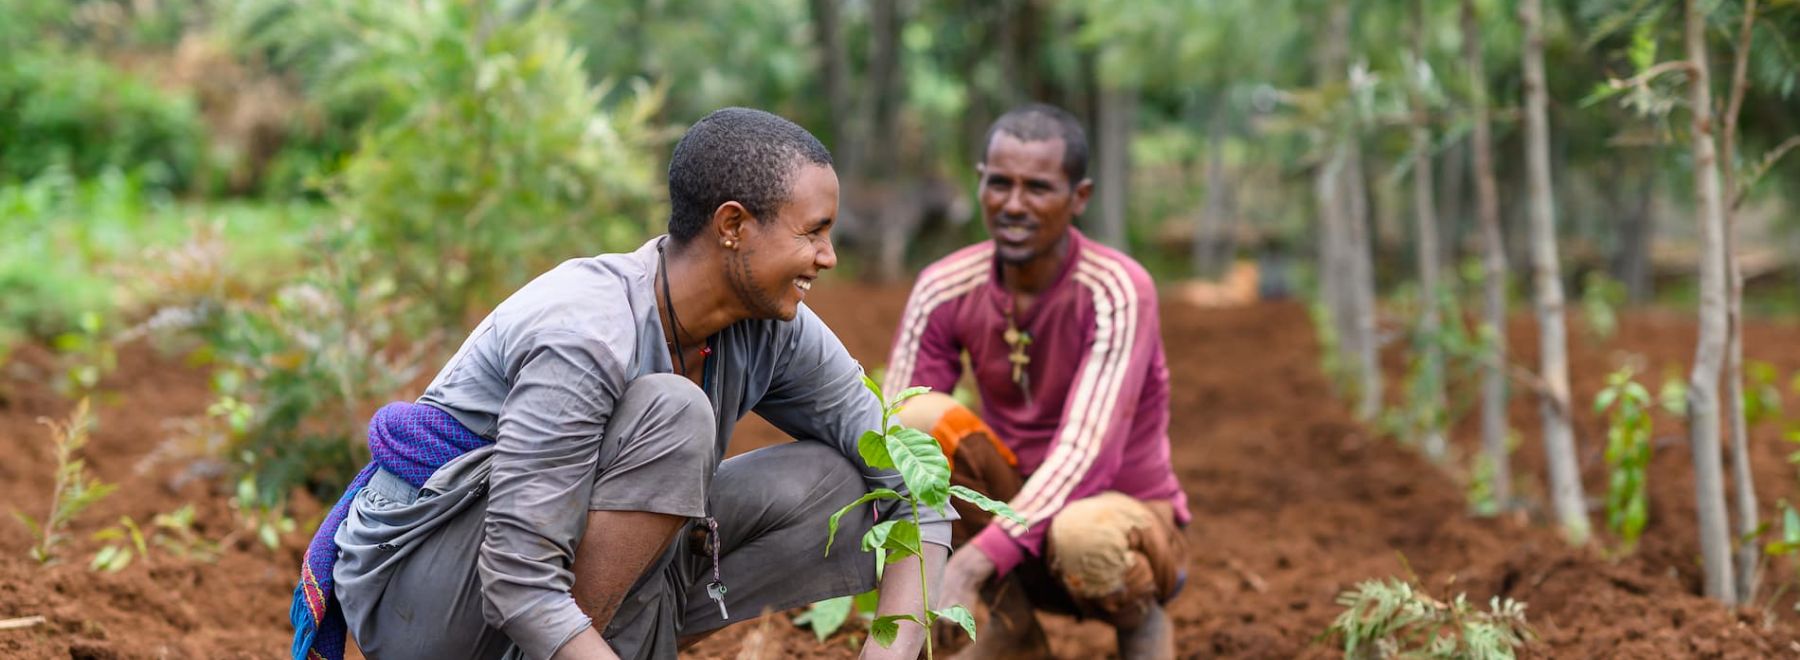 A farmer in Ethiopia smiles as she plants a tree seedling